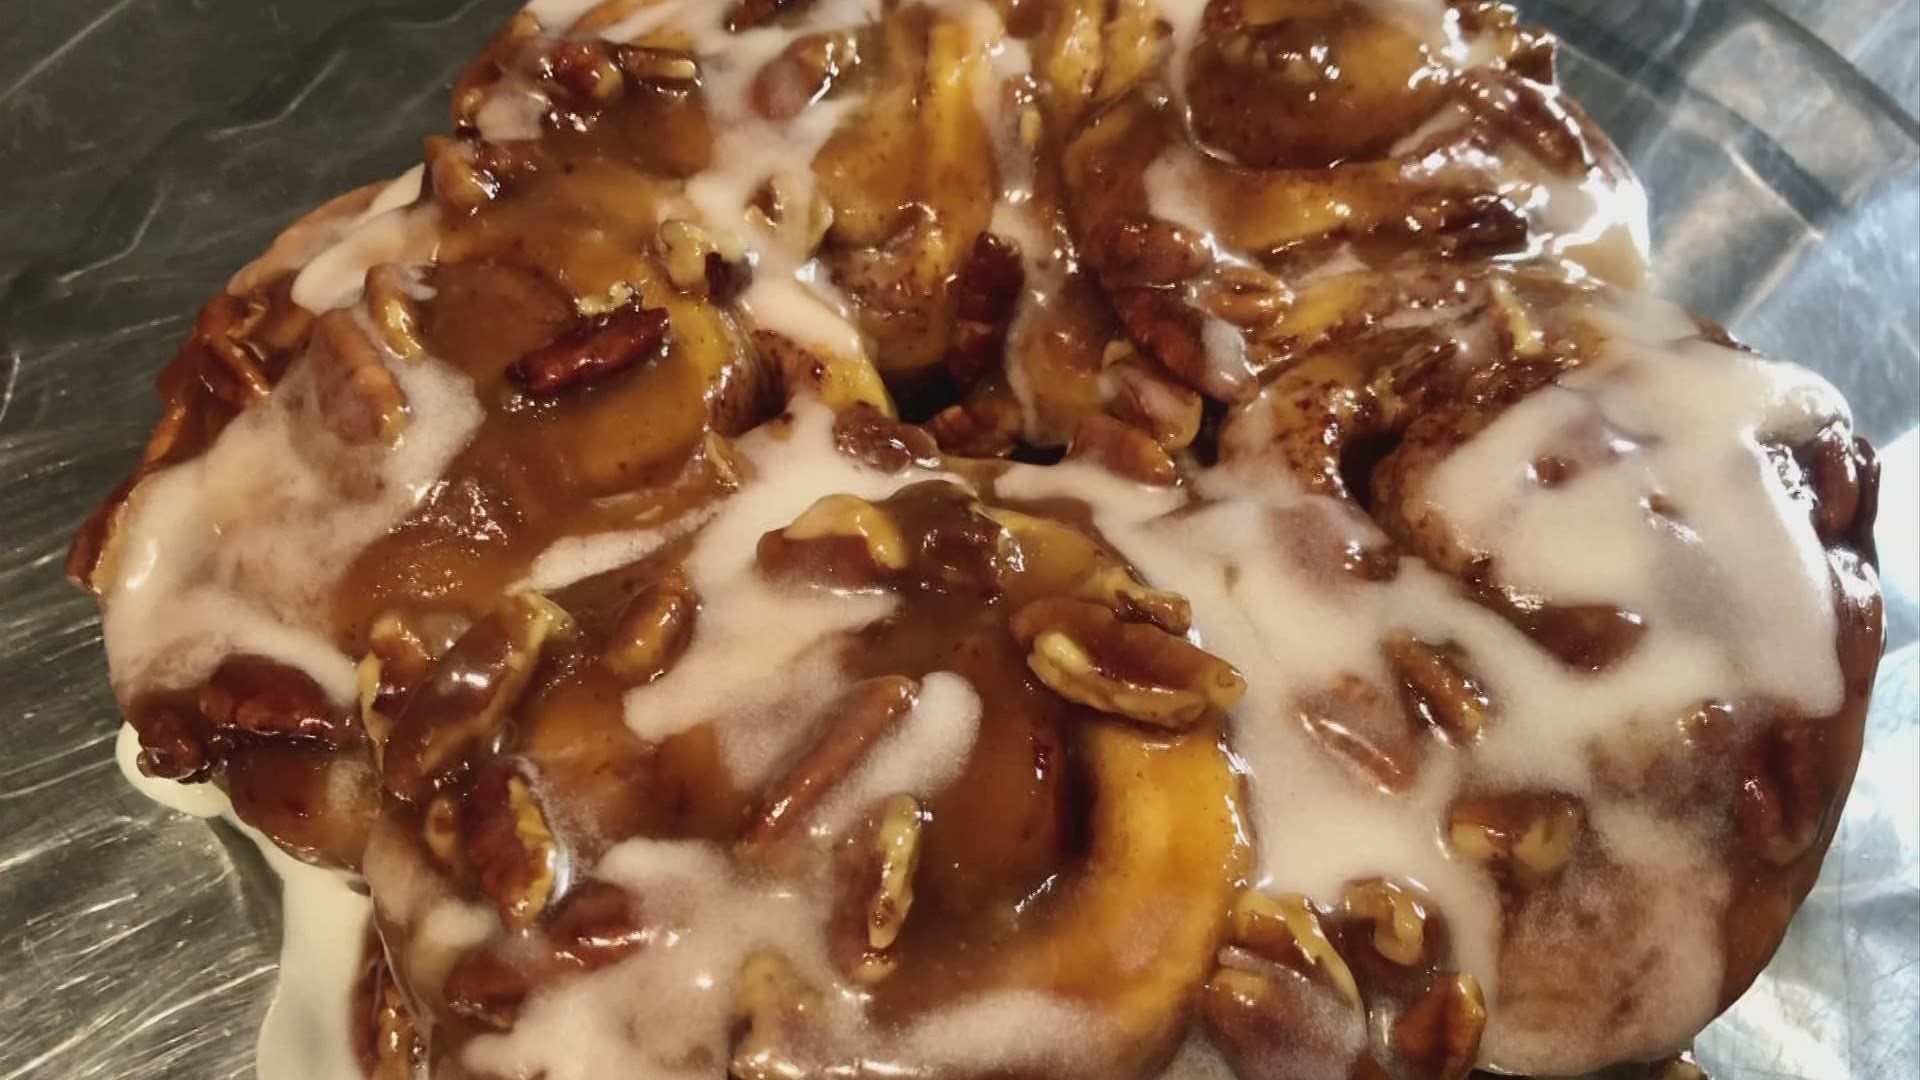 These sticky buns will surely help get your morning off to a sweet start.